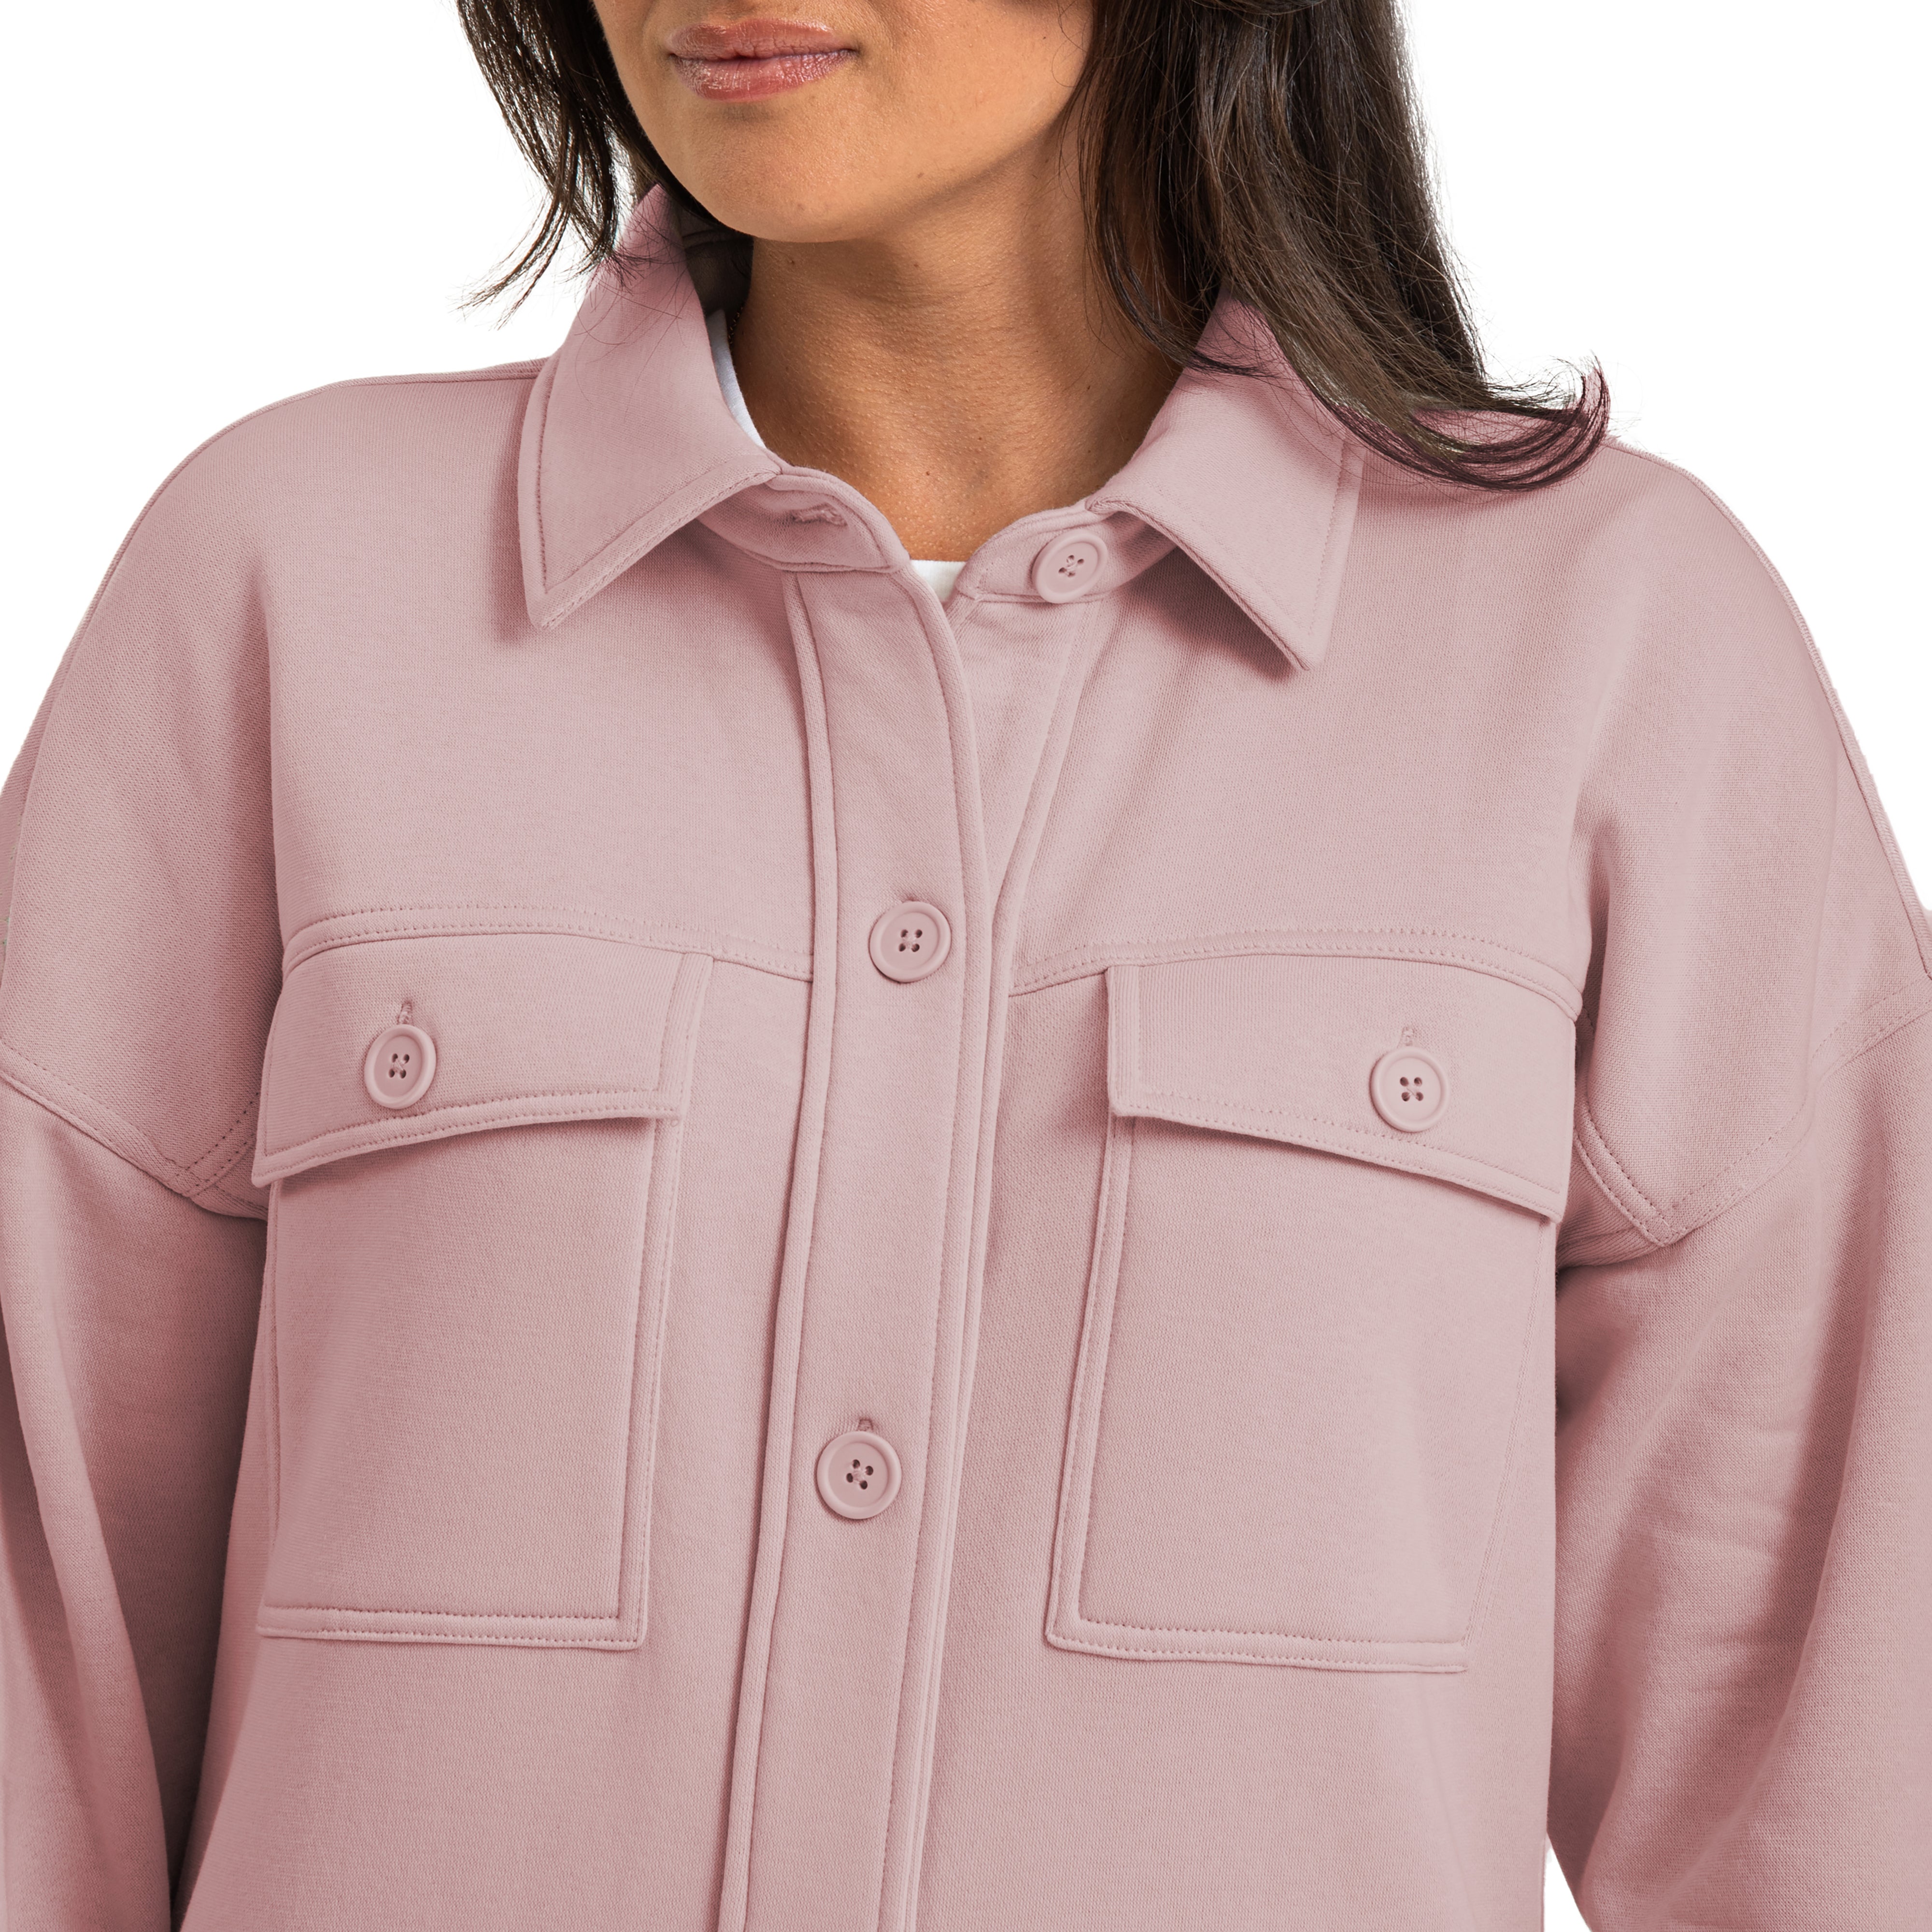 Shacket in pale mauve